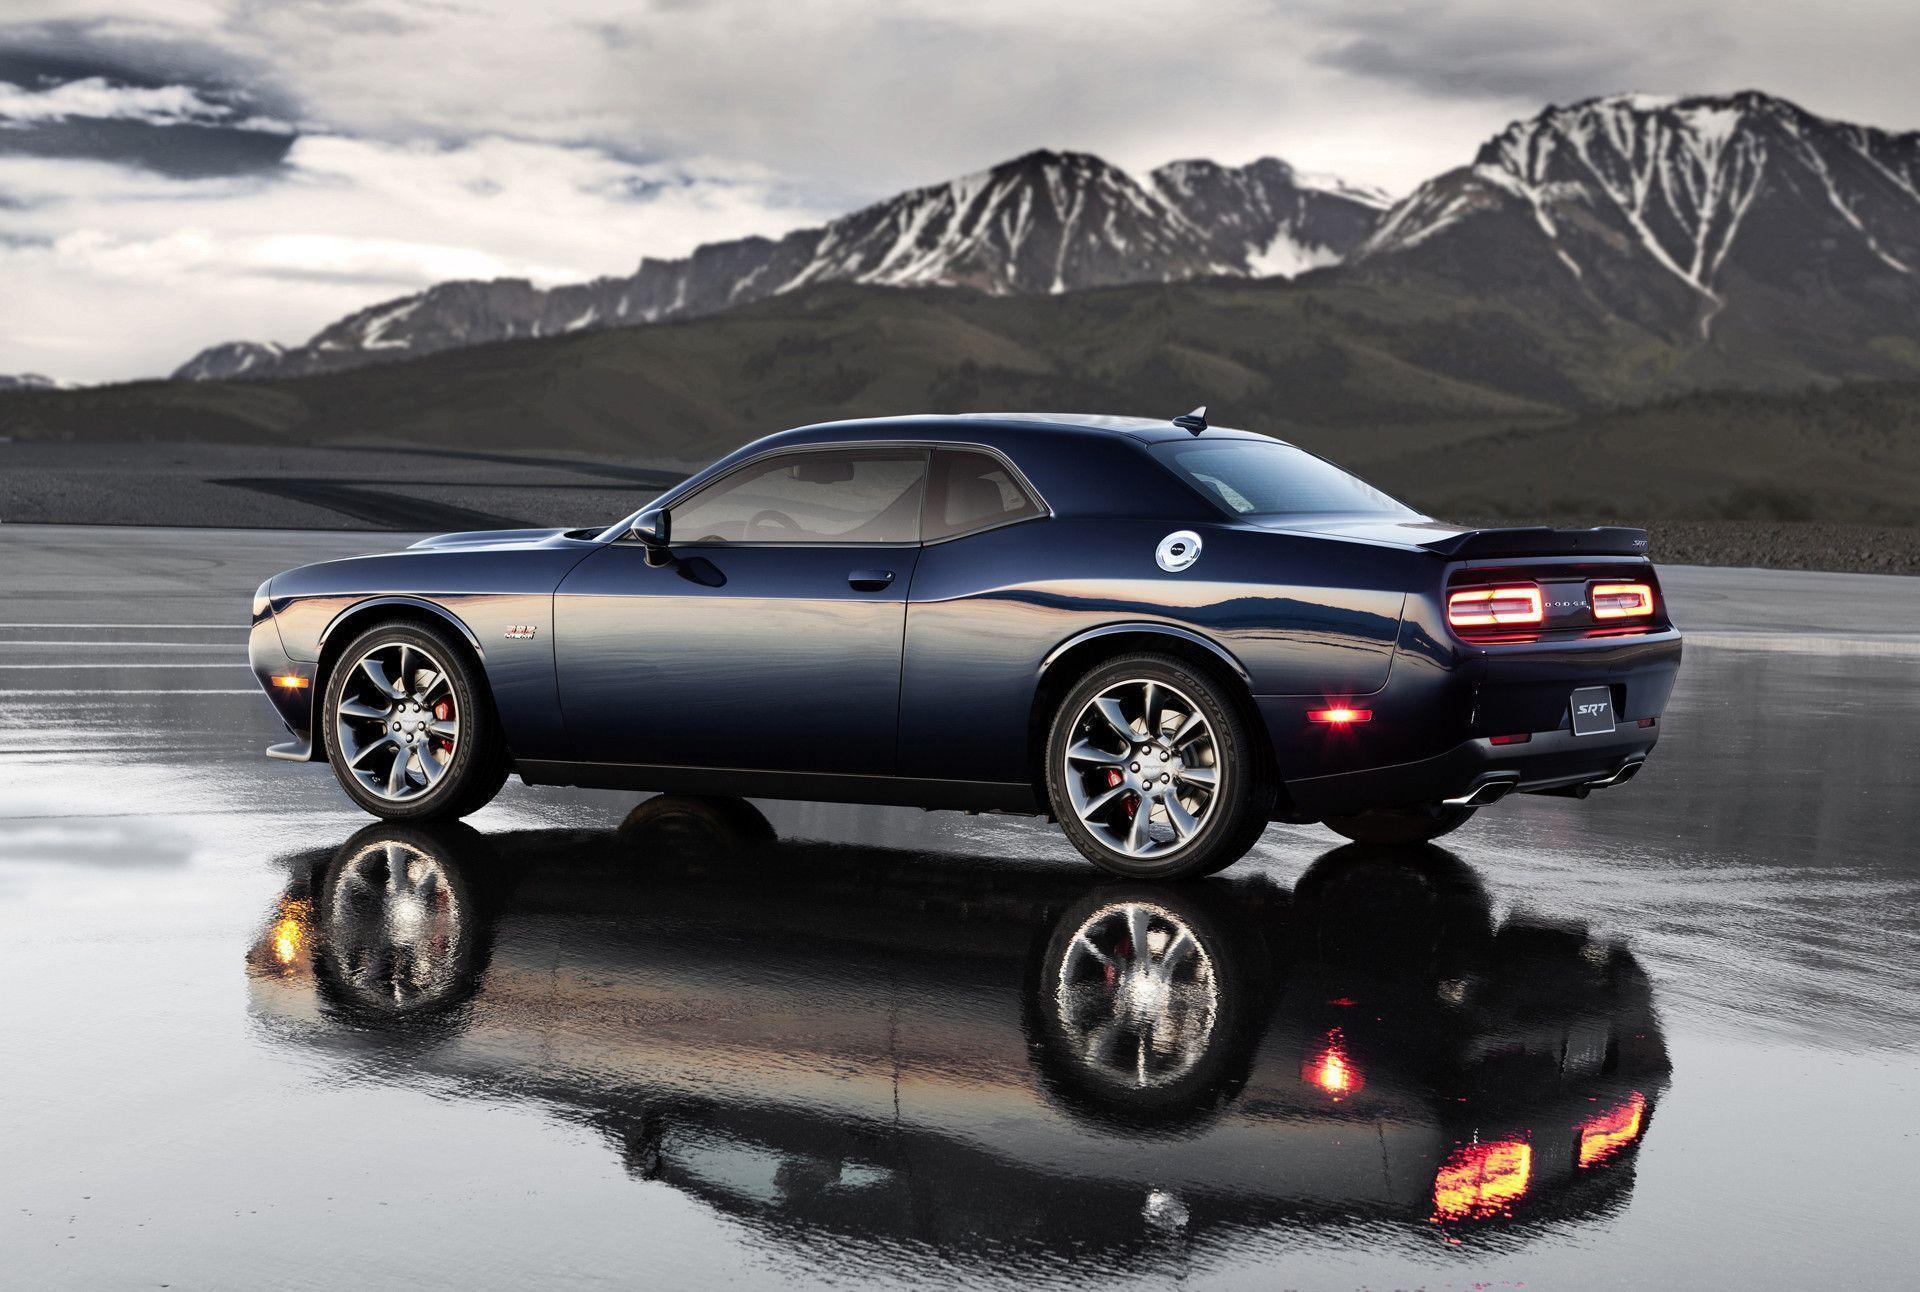 Dodge Unleashes Most Powerful Challenger Ever: All New 2015 Dodge